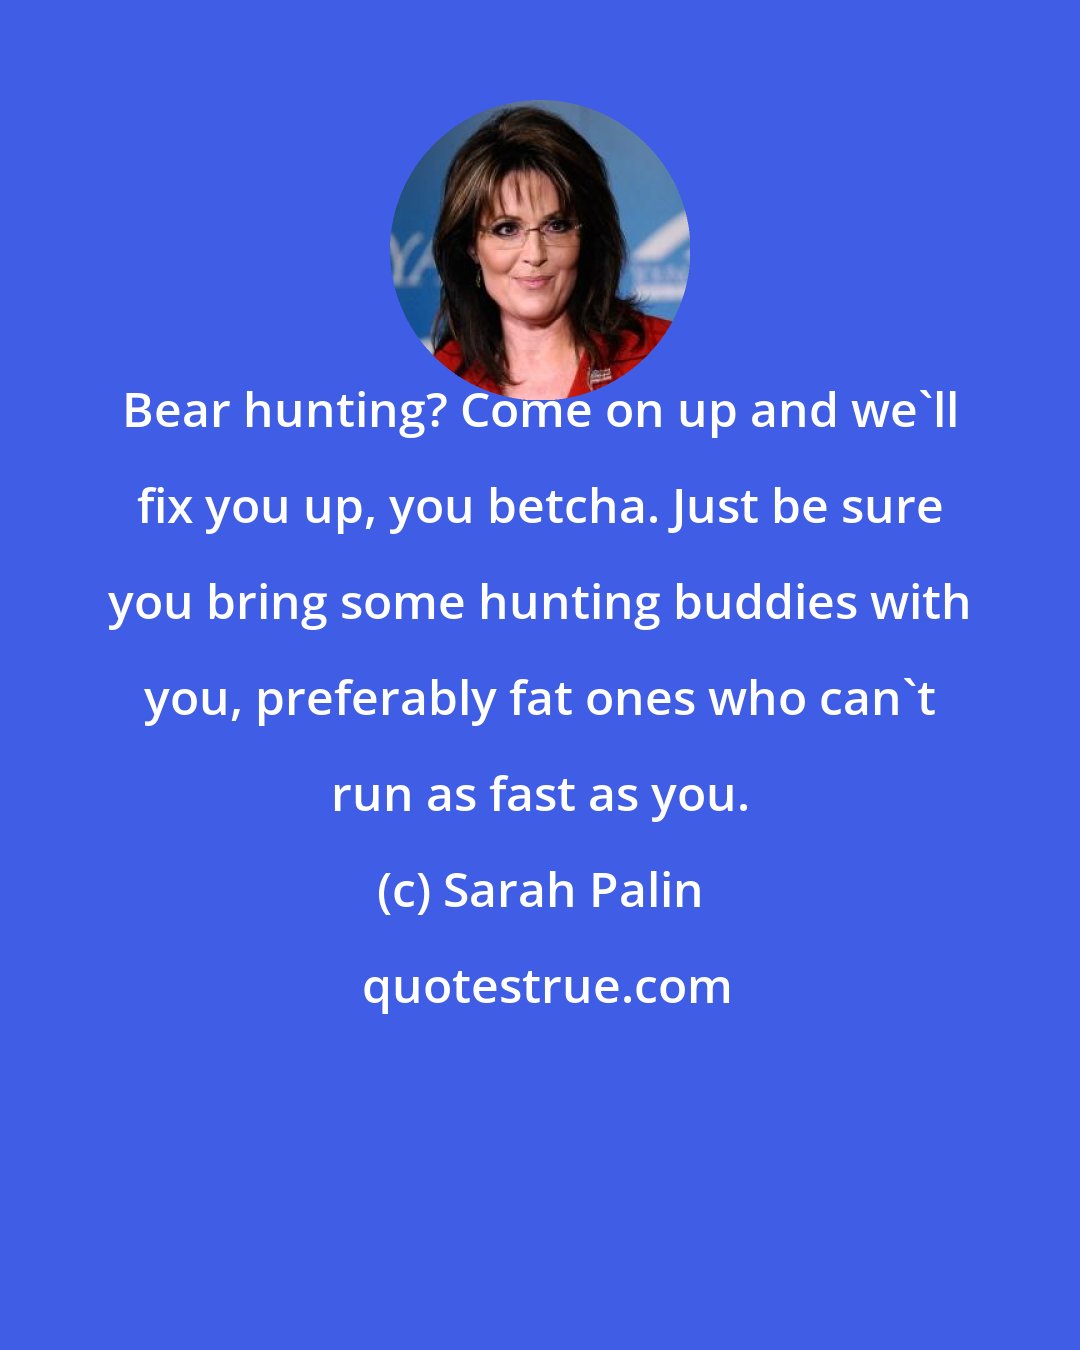 Sarah Palin: Bear hunting? Come on up and we'll fix you up, you betcha. Just be sure you bring some hunting buddies with you, preferably fat ones who can't run as fast as you.